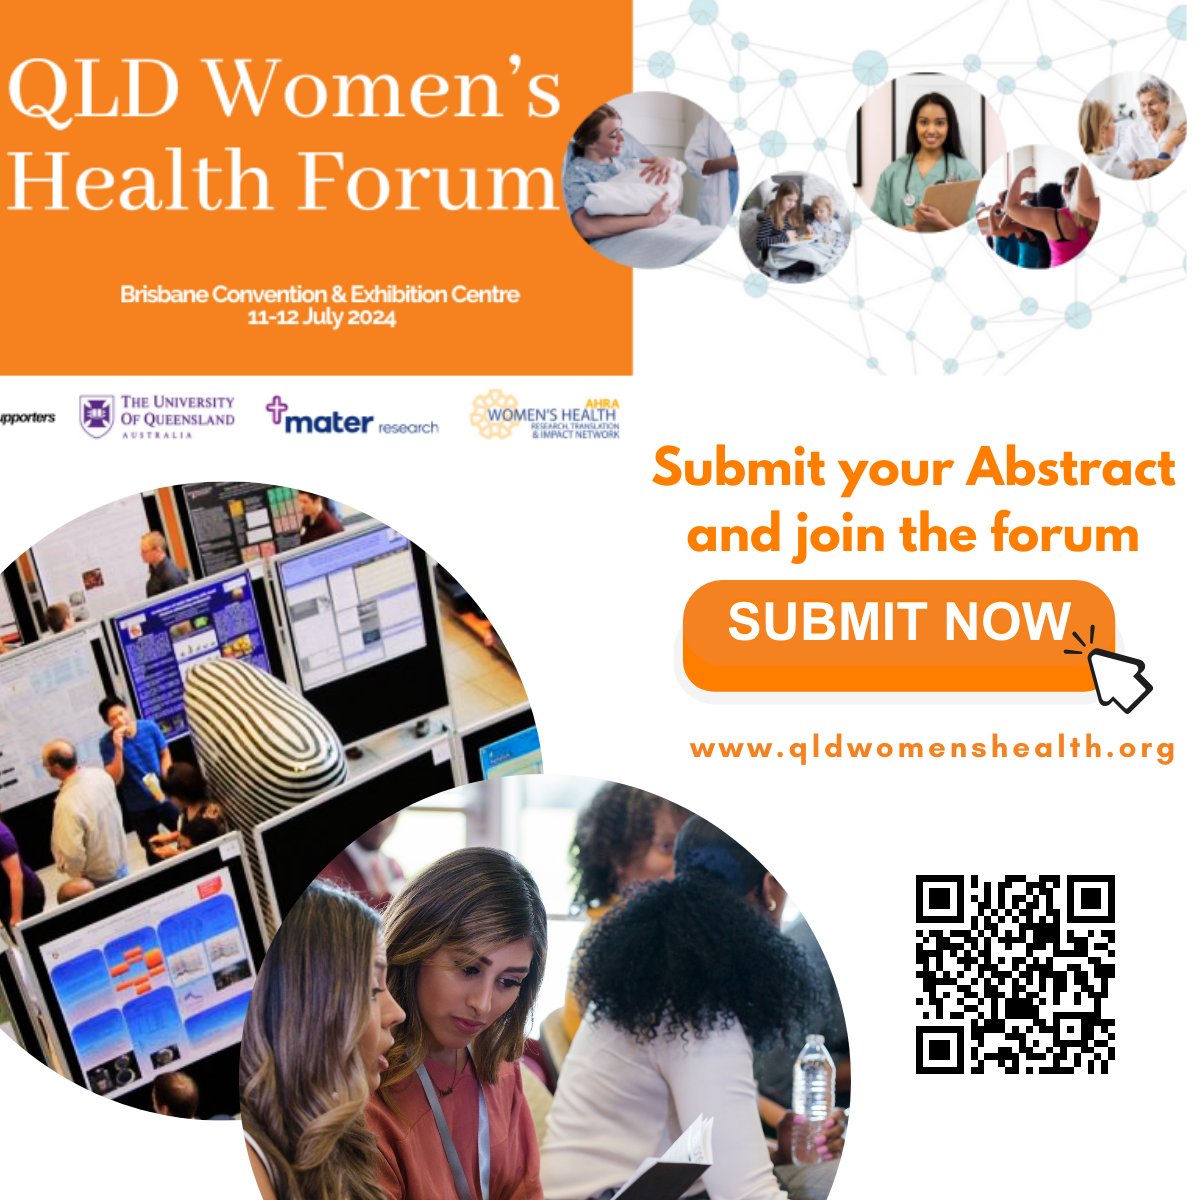 An exciting year for the #QLDWomensHealth Forum with the launch of the $1 billion Queensland Women and Girls' Health Strategy which will deliver 34 new flagship initiatives. Belinda Lewis, @qldhealth will speak about the Strategy. #HealthForHer Learn more: qldwomenshealth.org